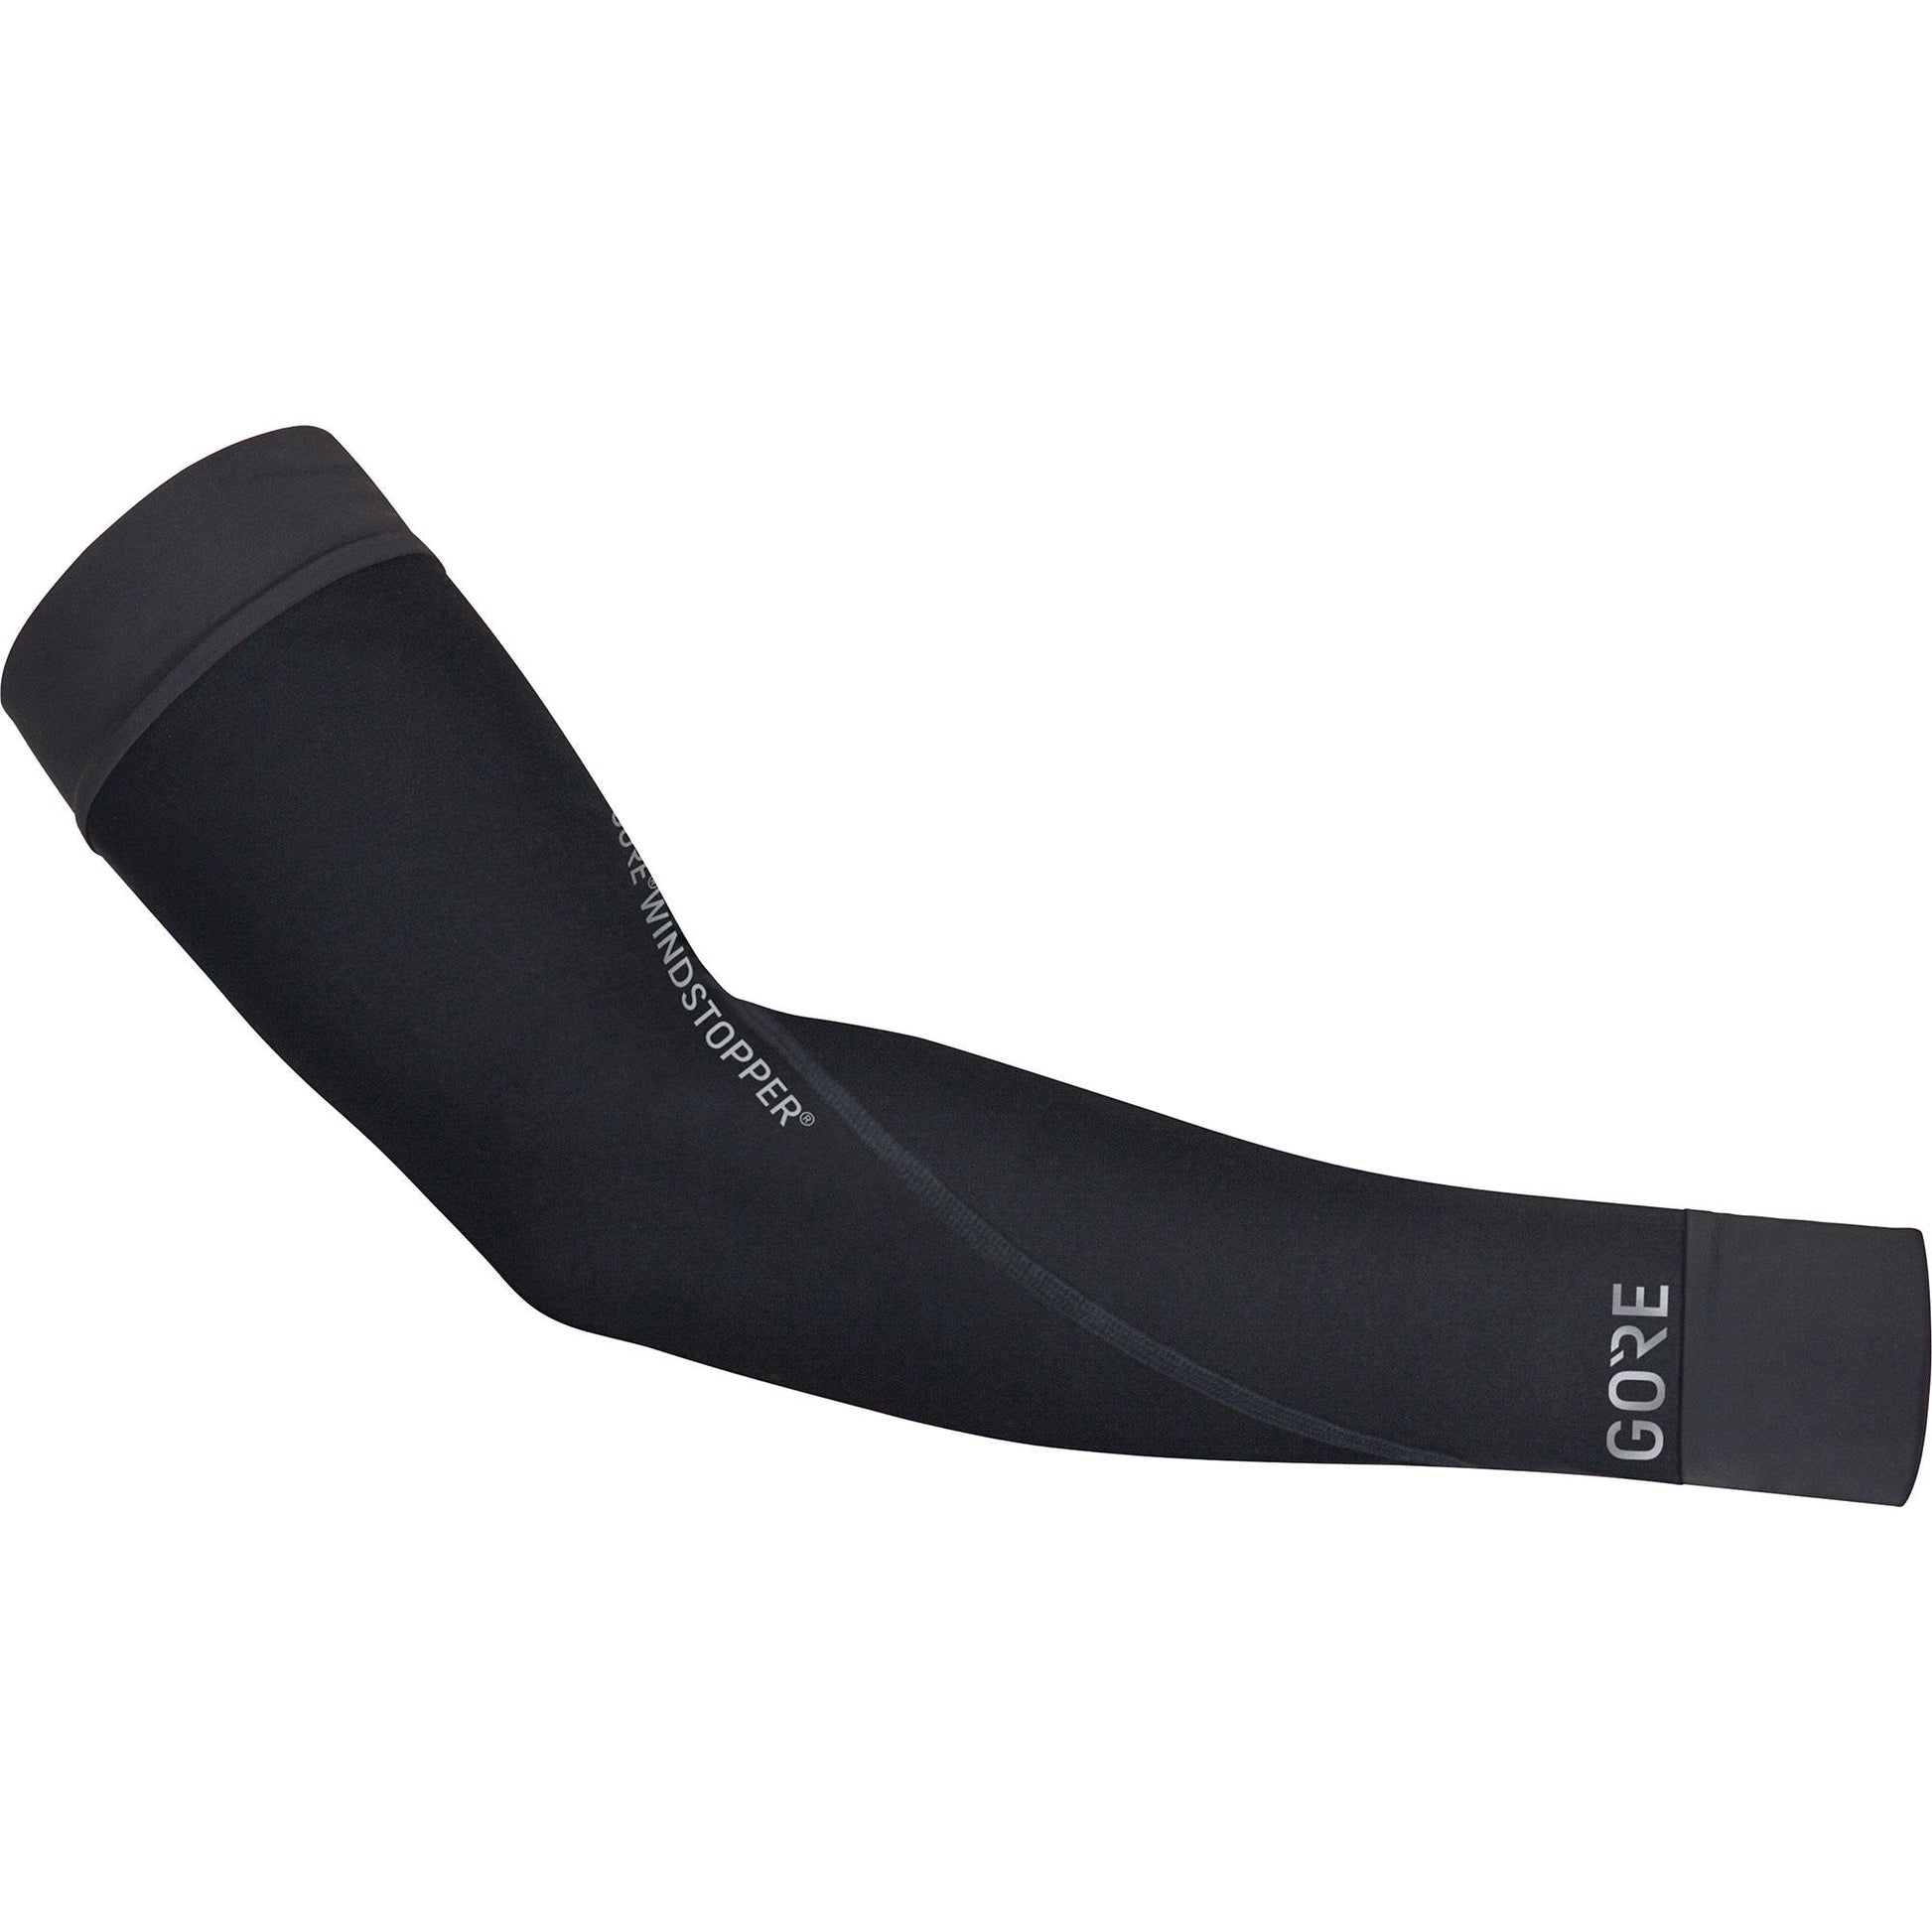 Gore M Gore Windstopper Arm Warmers, 2020 - Cycle Closet